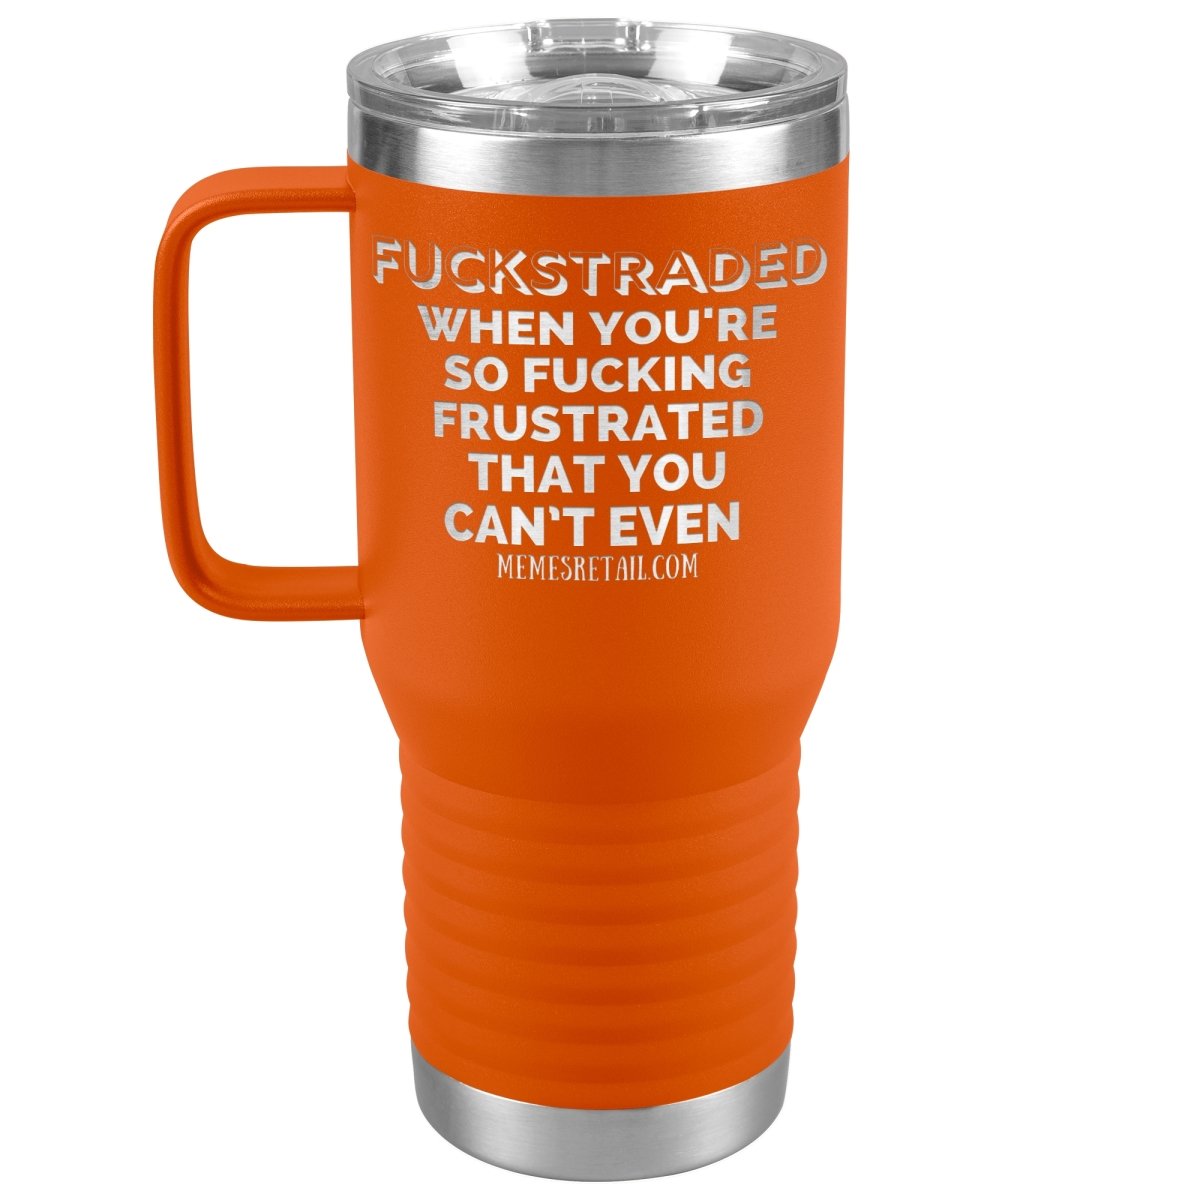 Fuckstraded, When You're So Fucking Frustrated That You Can’t Even Tumblers, 20oz Travel Tumbler / Orange - MemesRetail.com